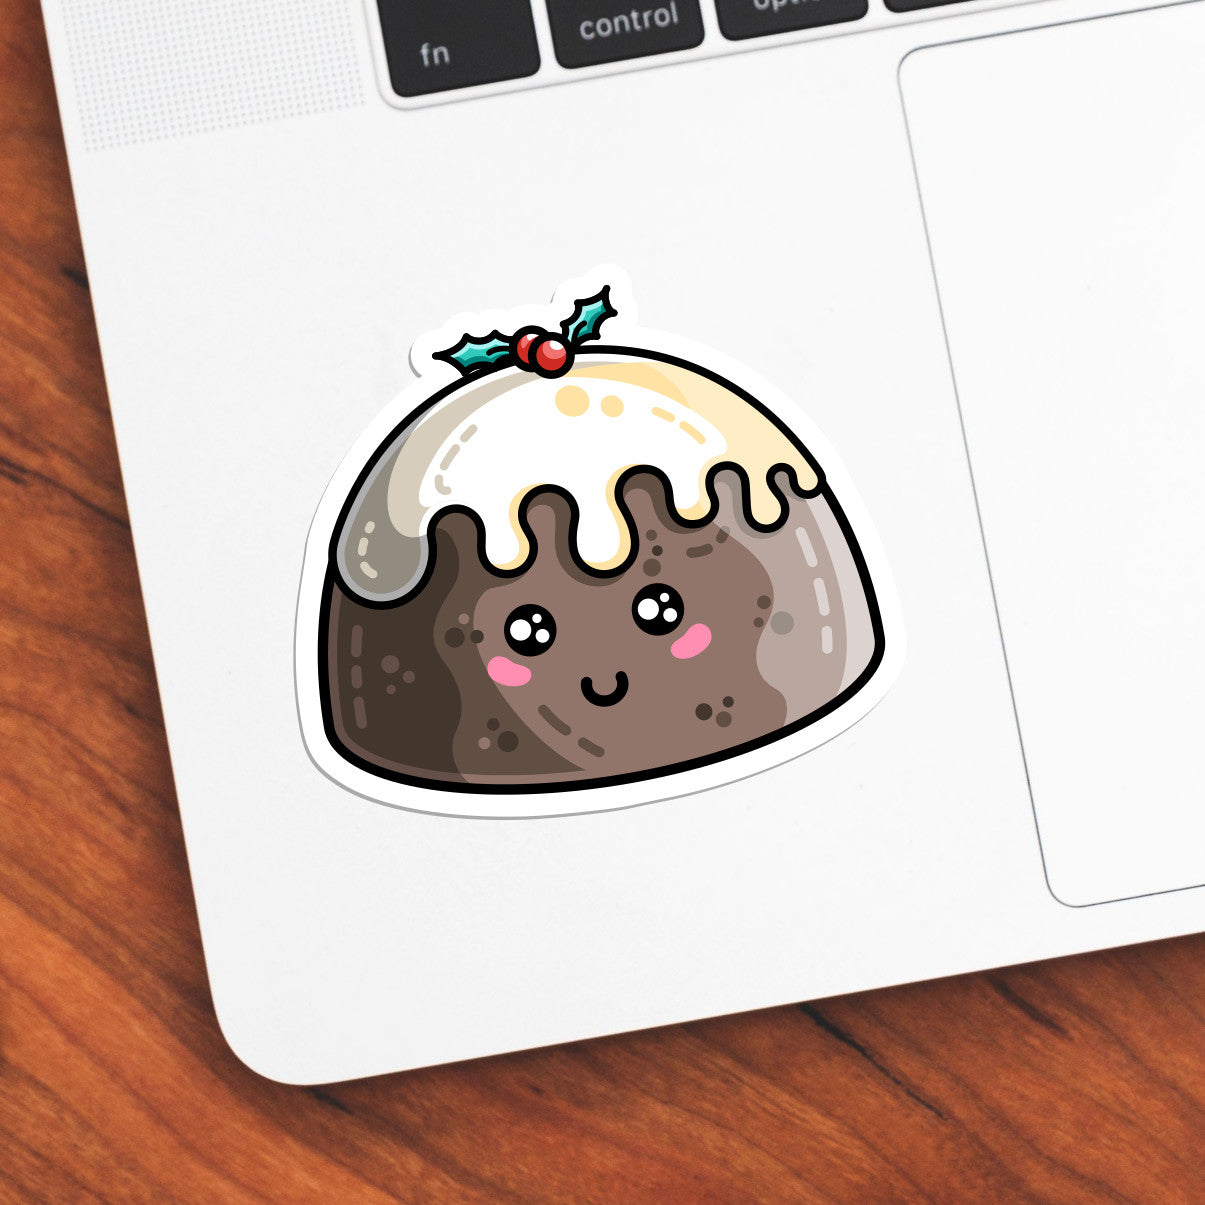 The corner of a laptop keyboard with a cute Christmas pudding die cut vinyl sticker stuck onto it